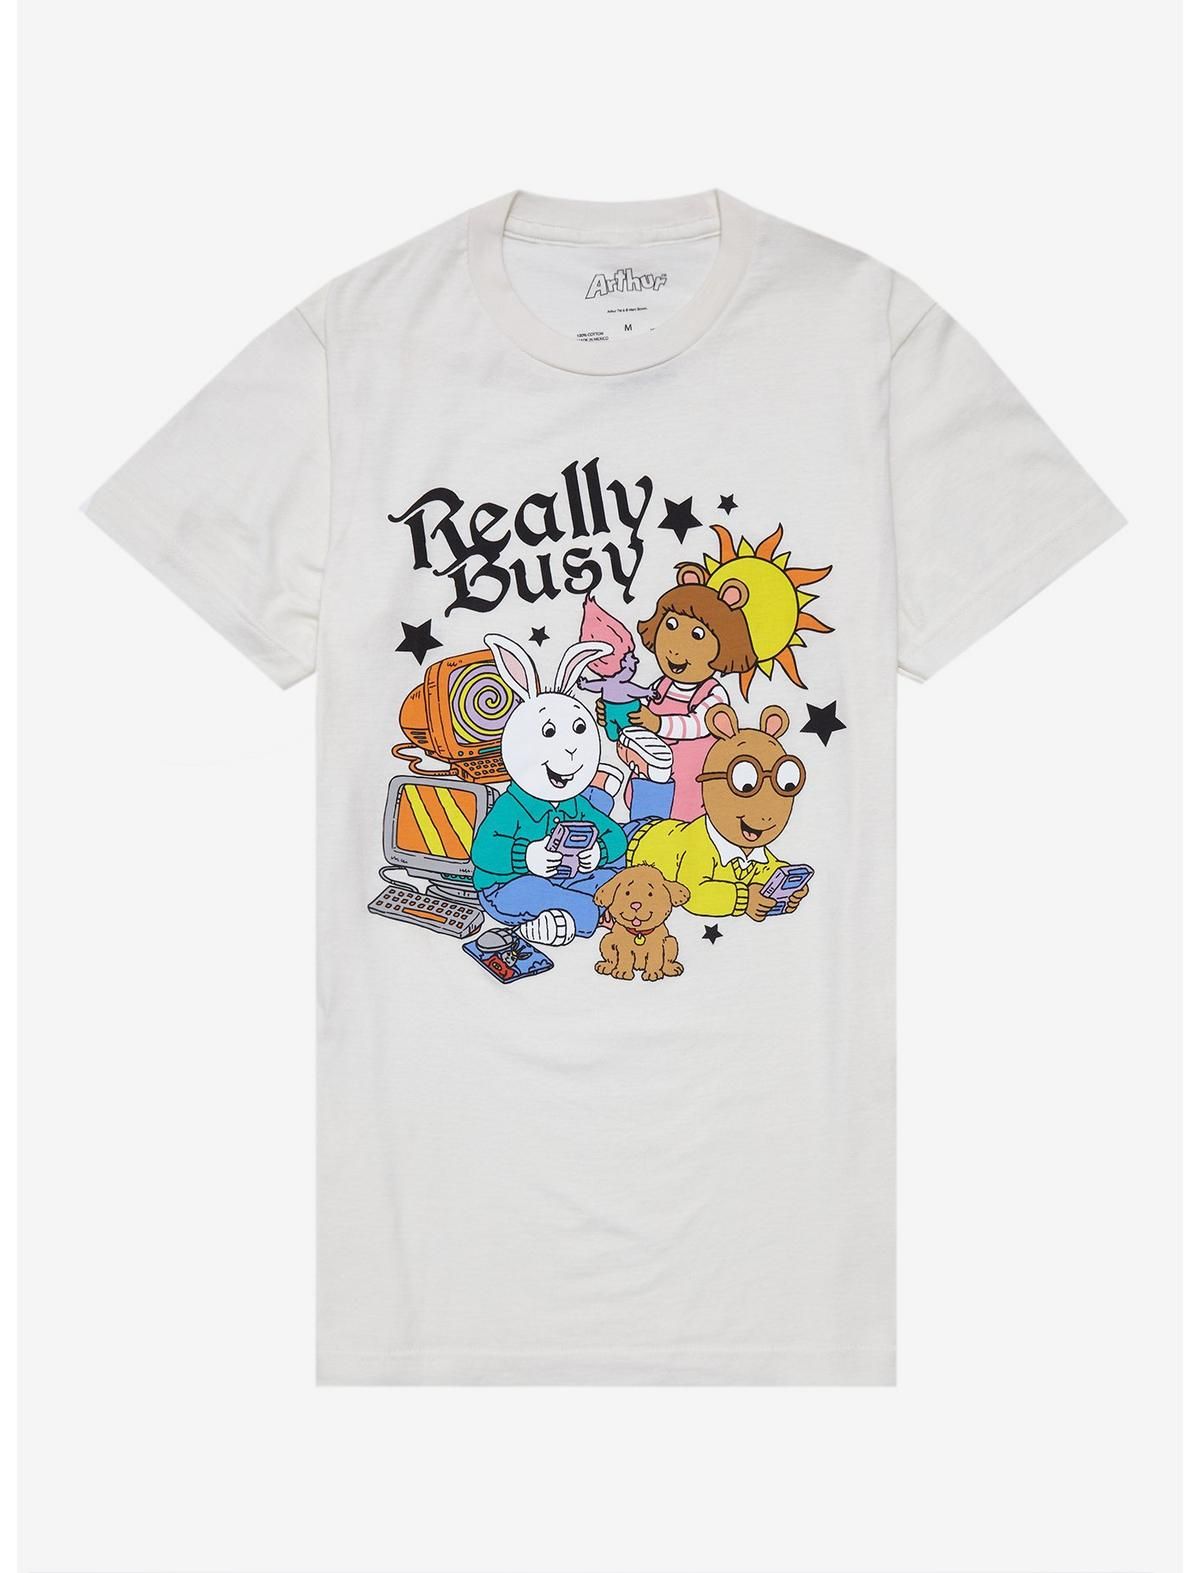 Arthur Really Busy T-Shirt - BoxLunch Exclusive | BoxLunch